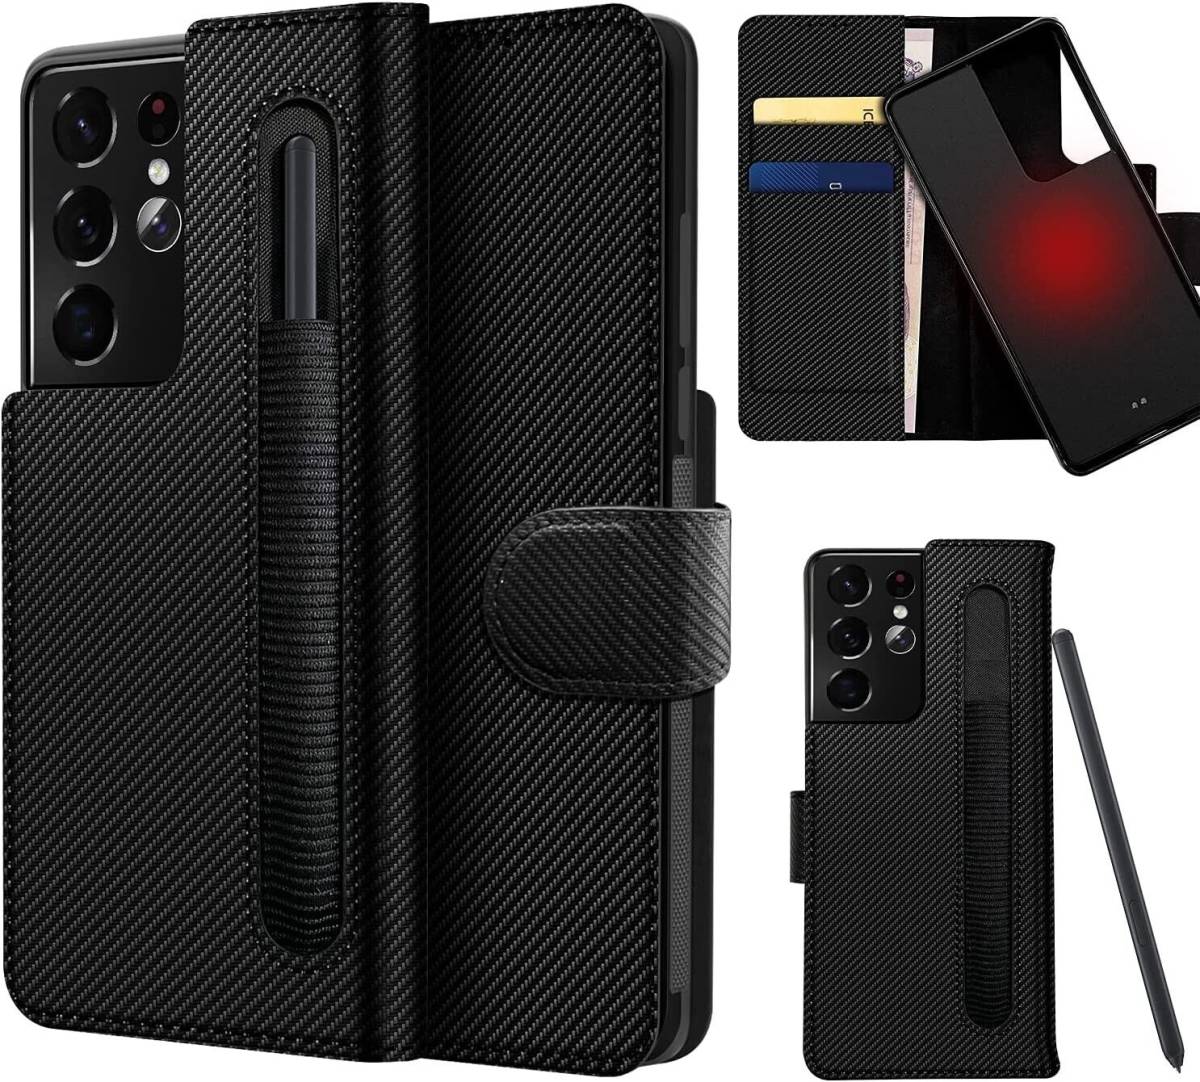 Samsung Galaxy S21 Ultra Case Flip Wallet Cover With S Pen Slot Leather Wallet 海外 即決